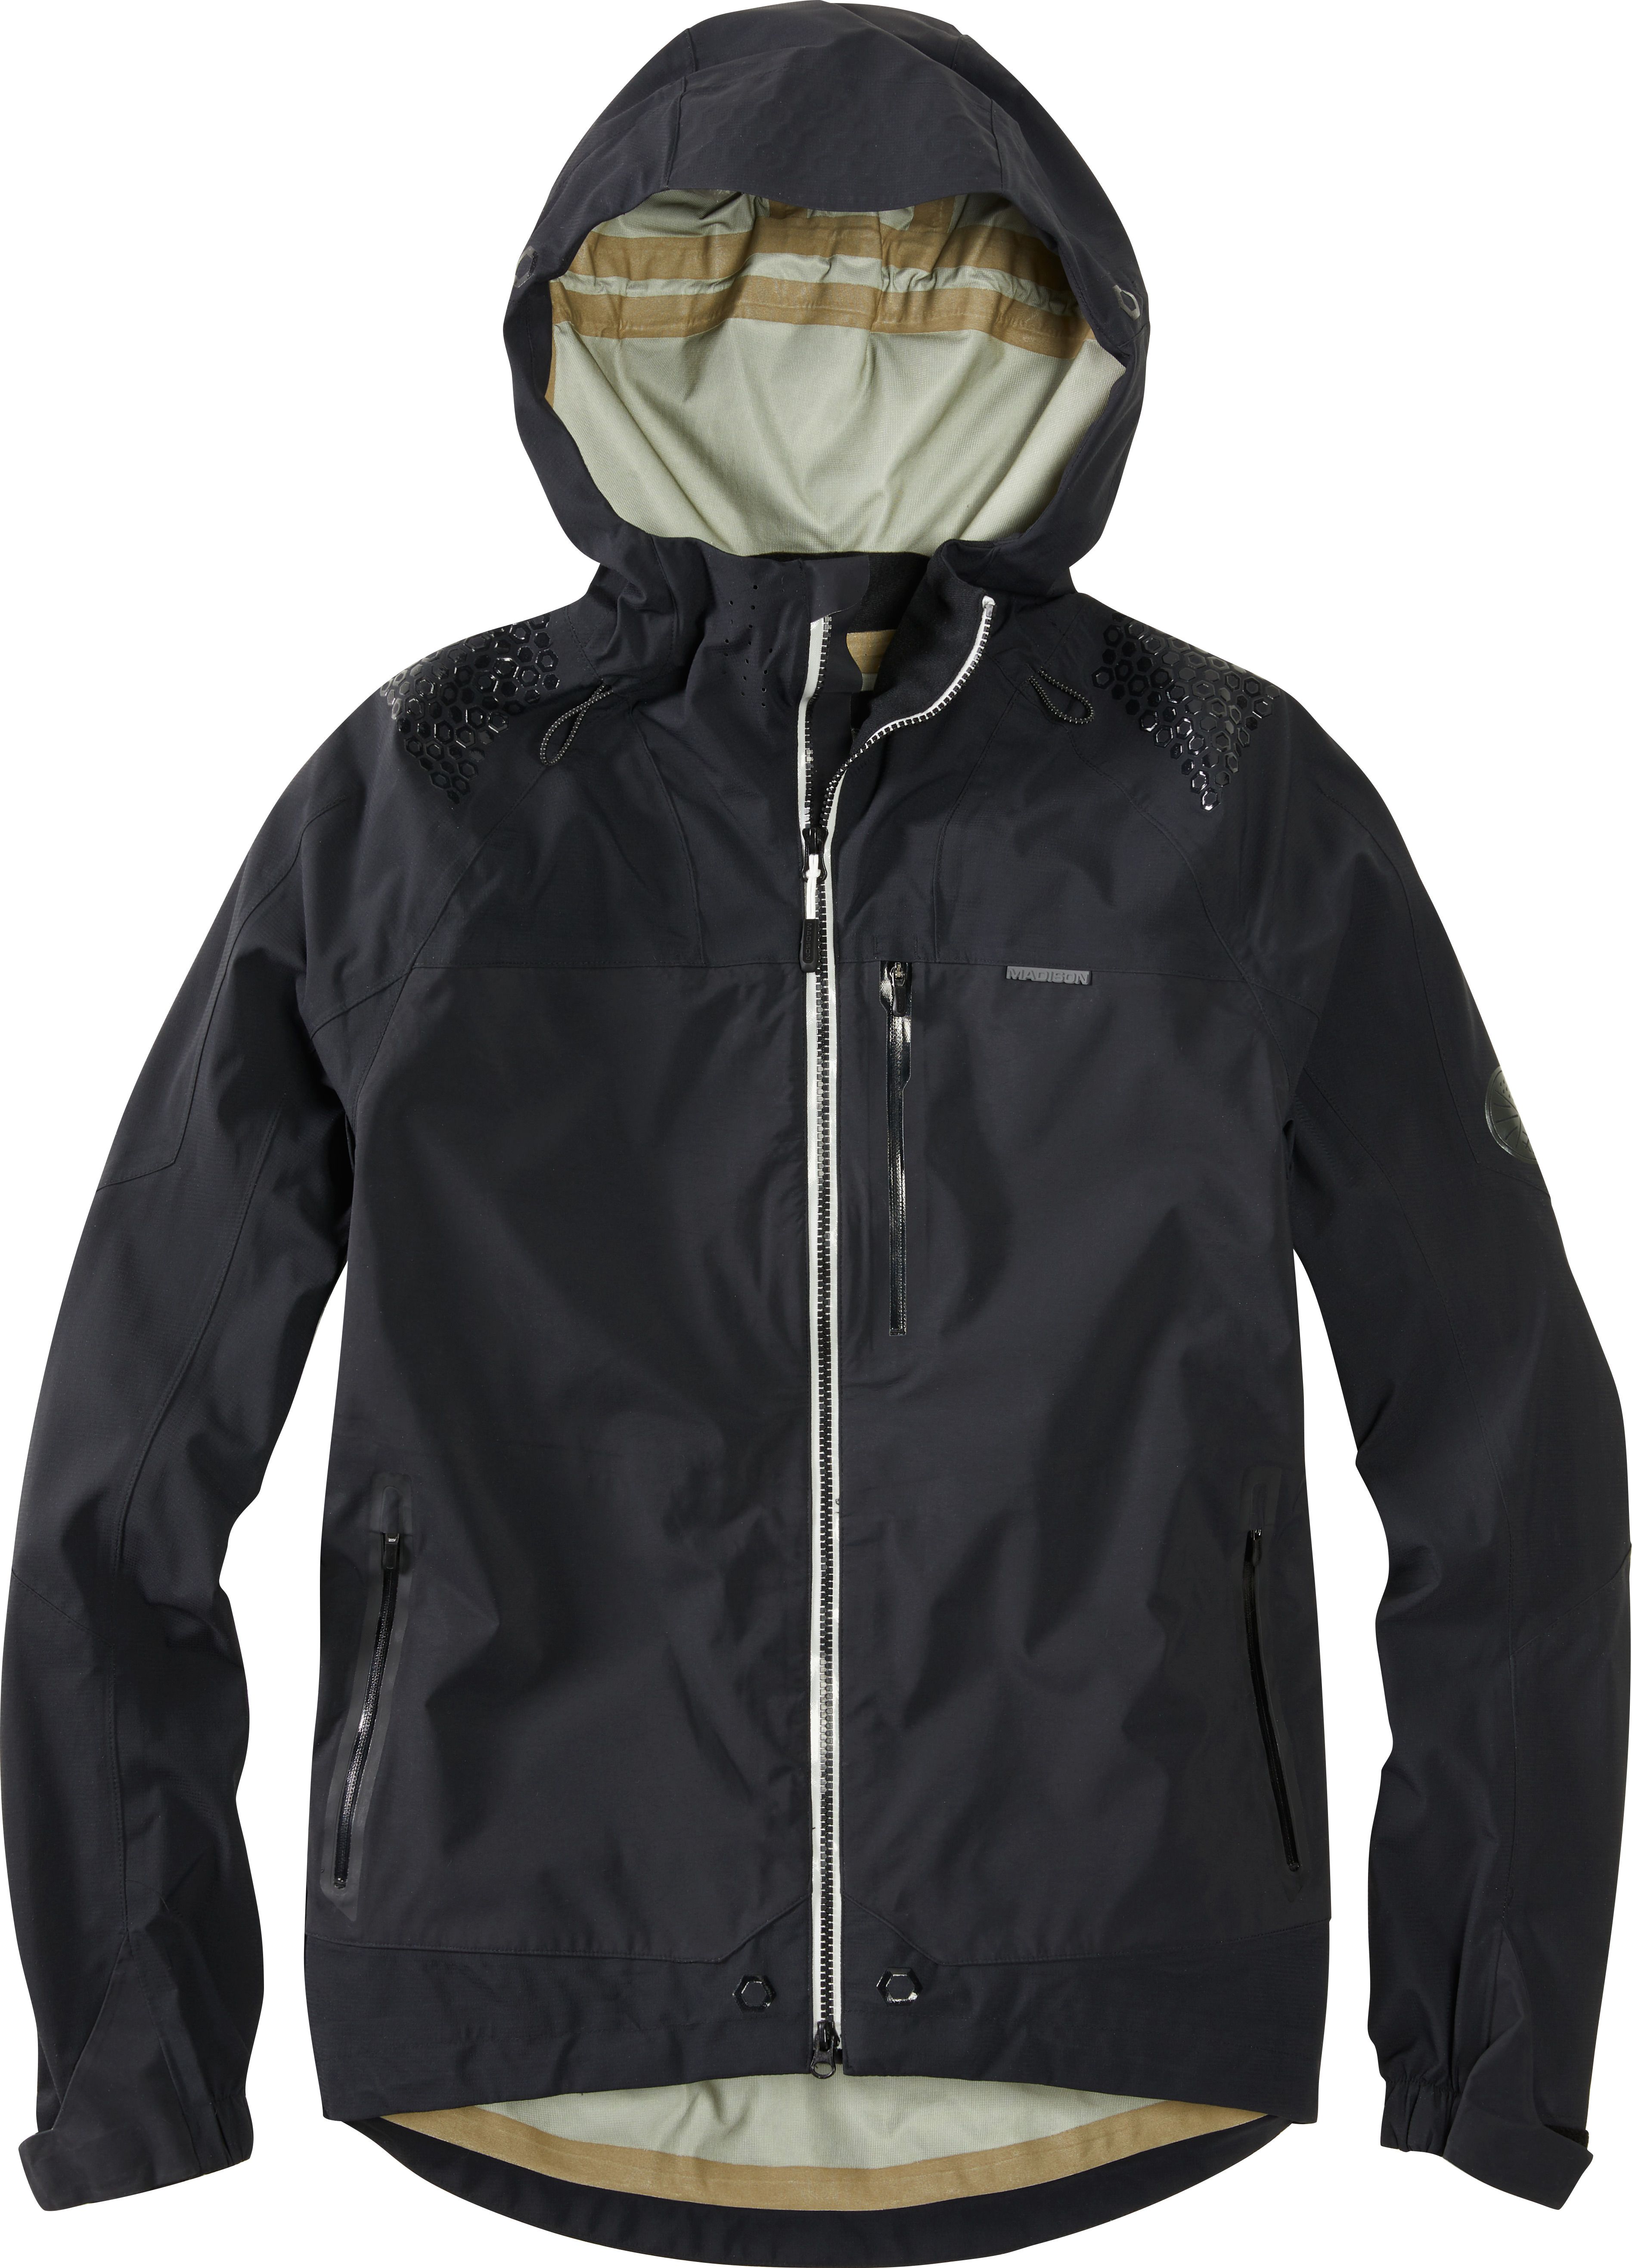 Madison Dte 3-LAYER Waterproof Storm Jacket Medium Only - £87.99 ...